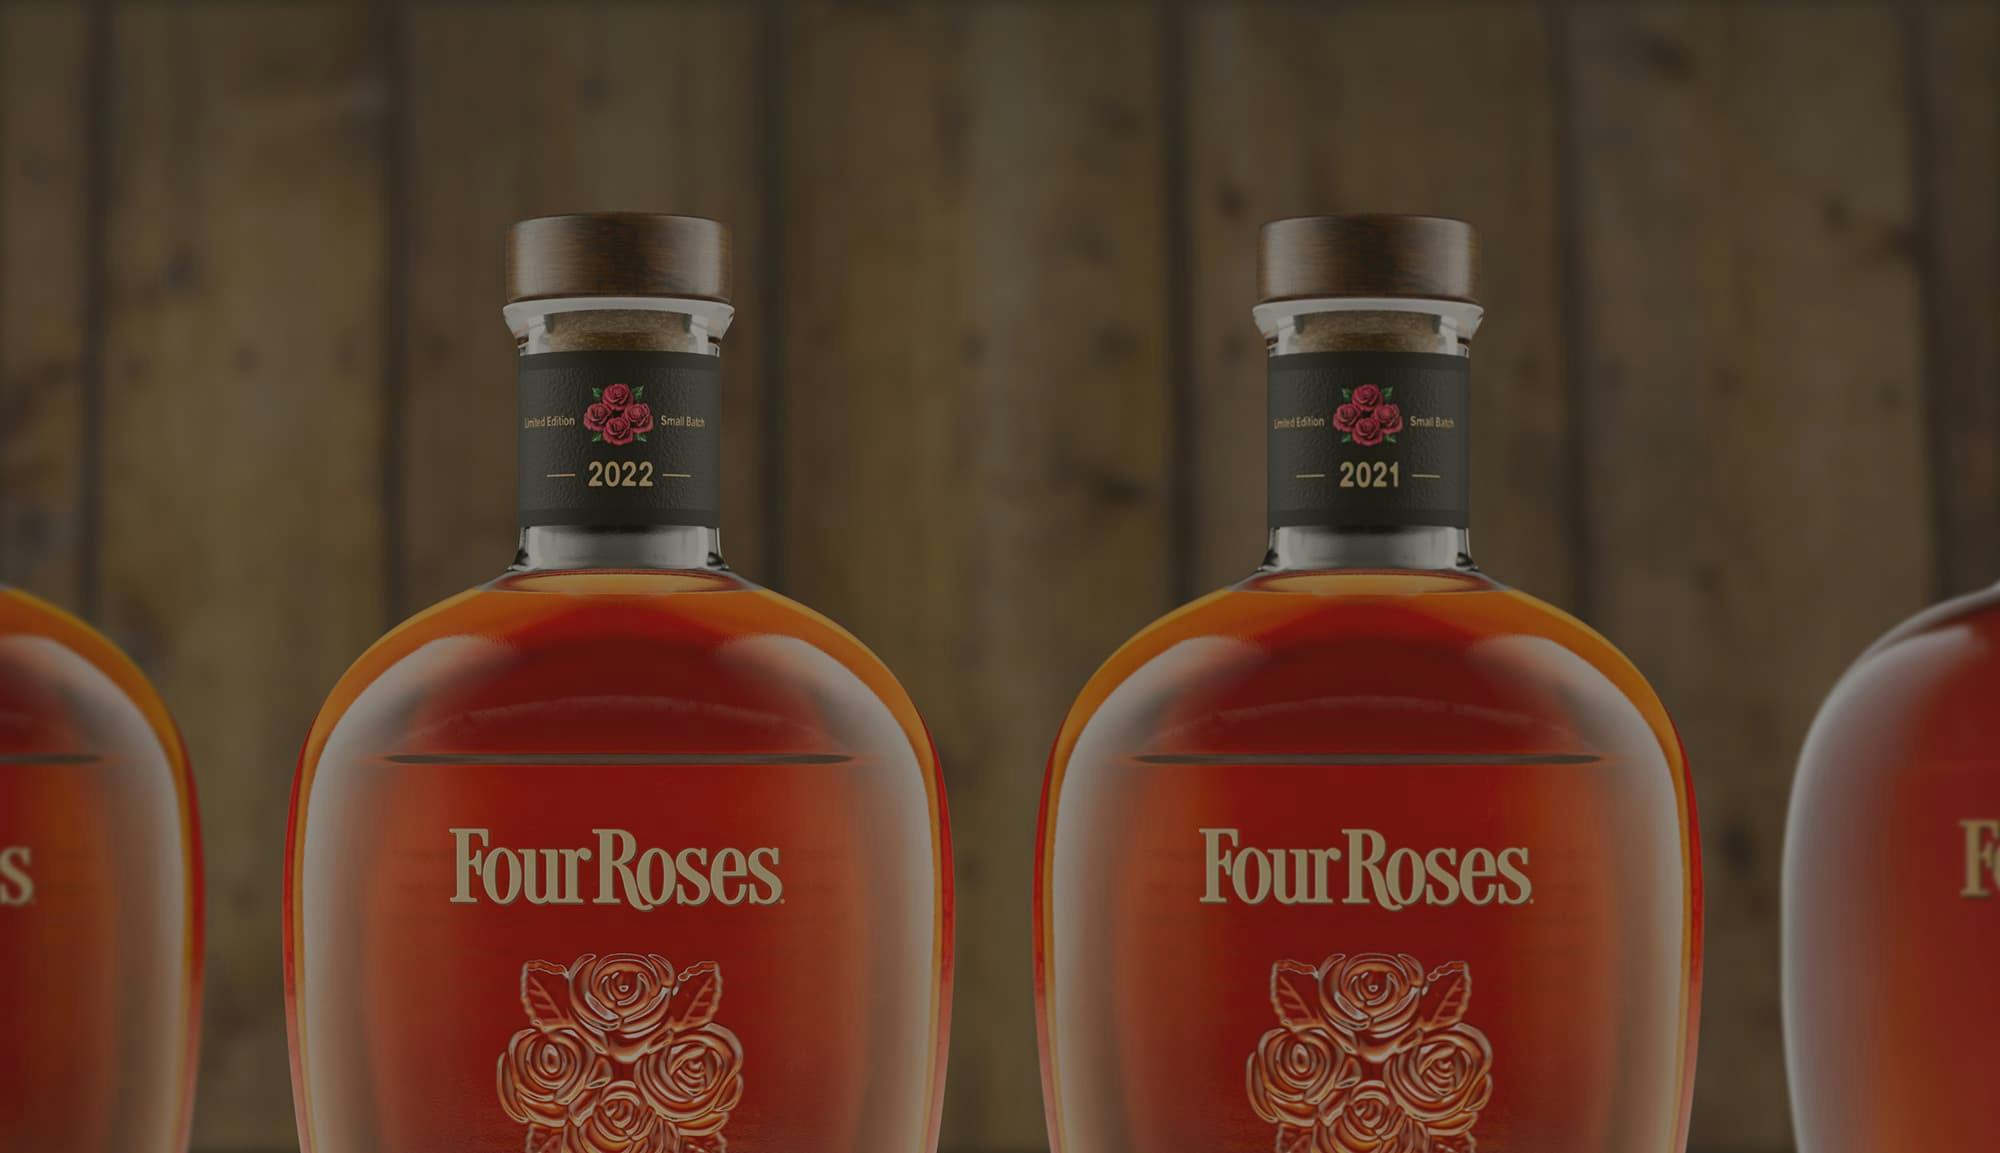 Four Roses Limited Edition Four Roses Barrels Light Up Your Palette